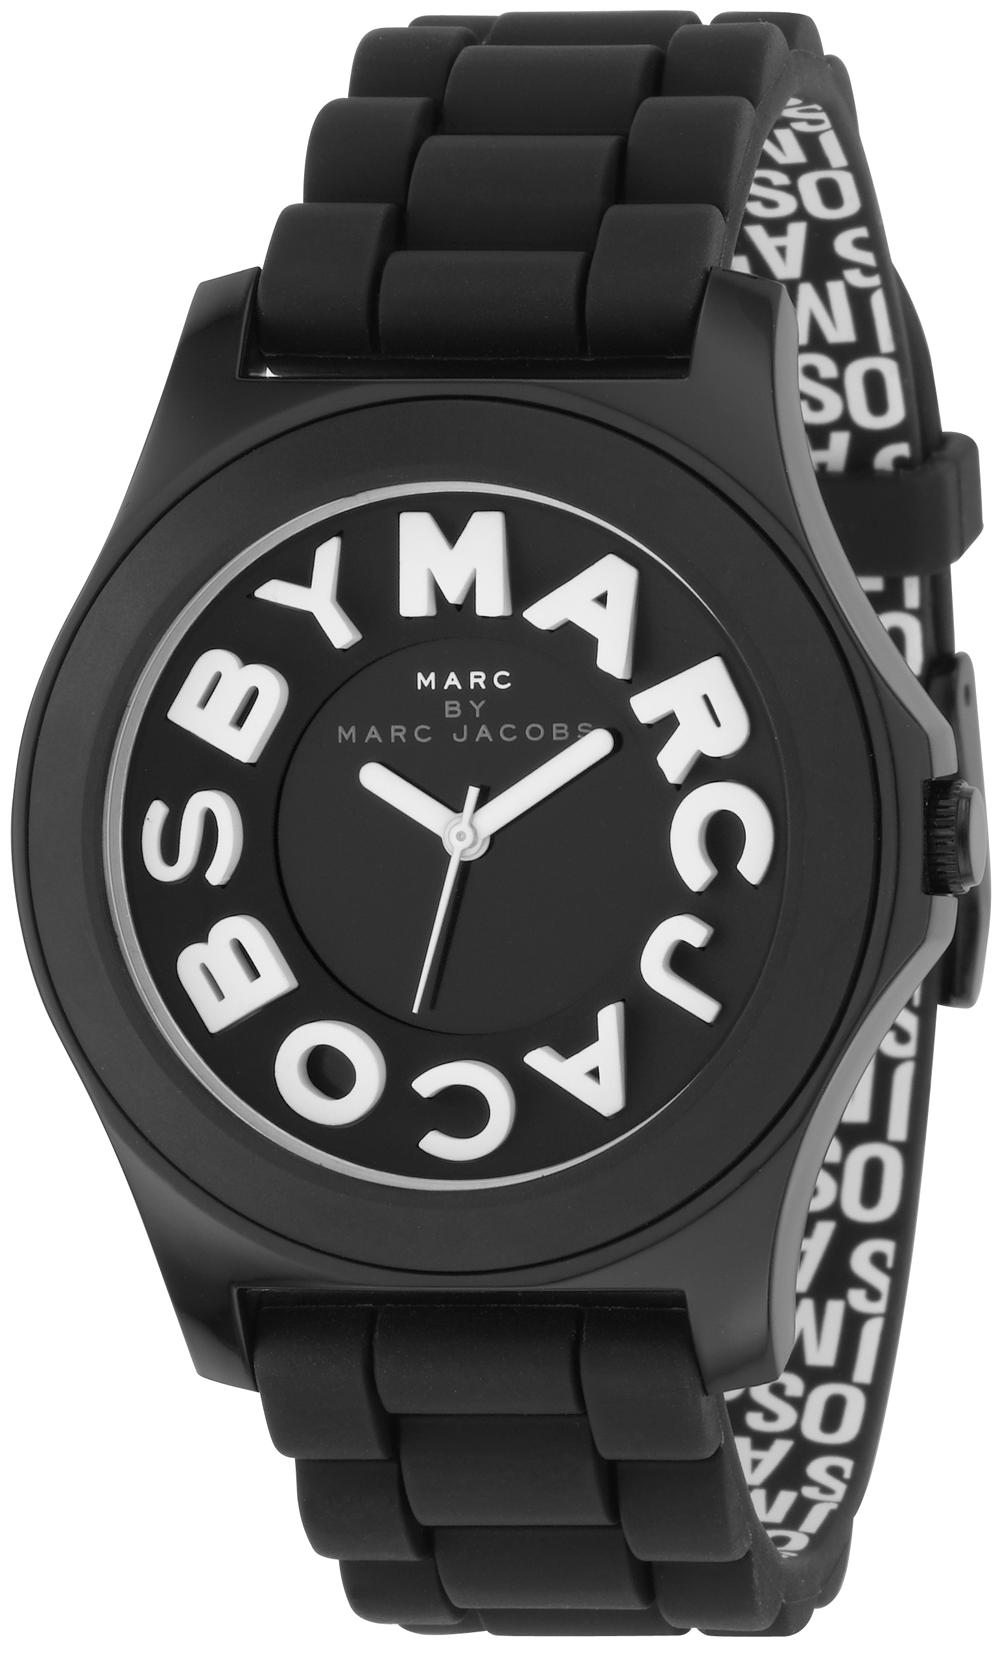 fake marc jacob watches in the Netherlands